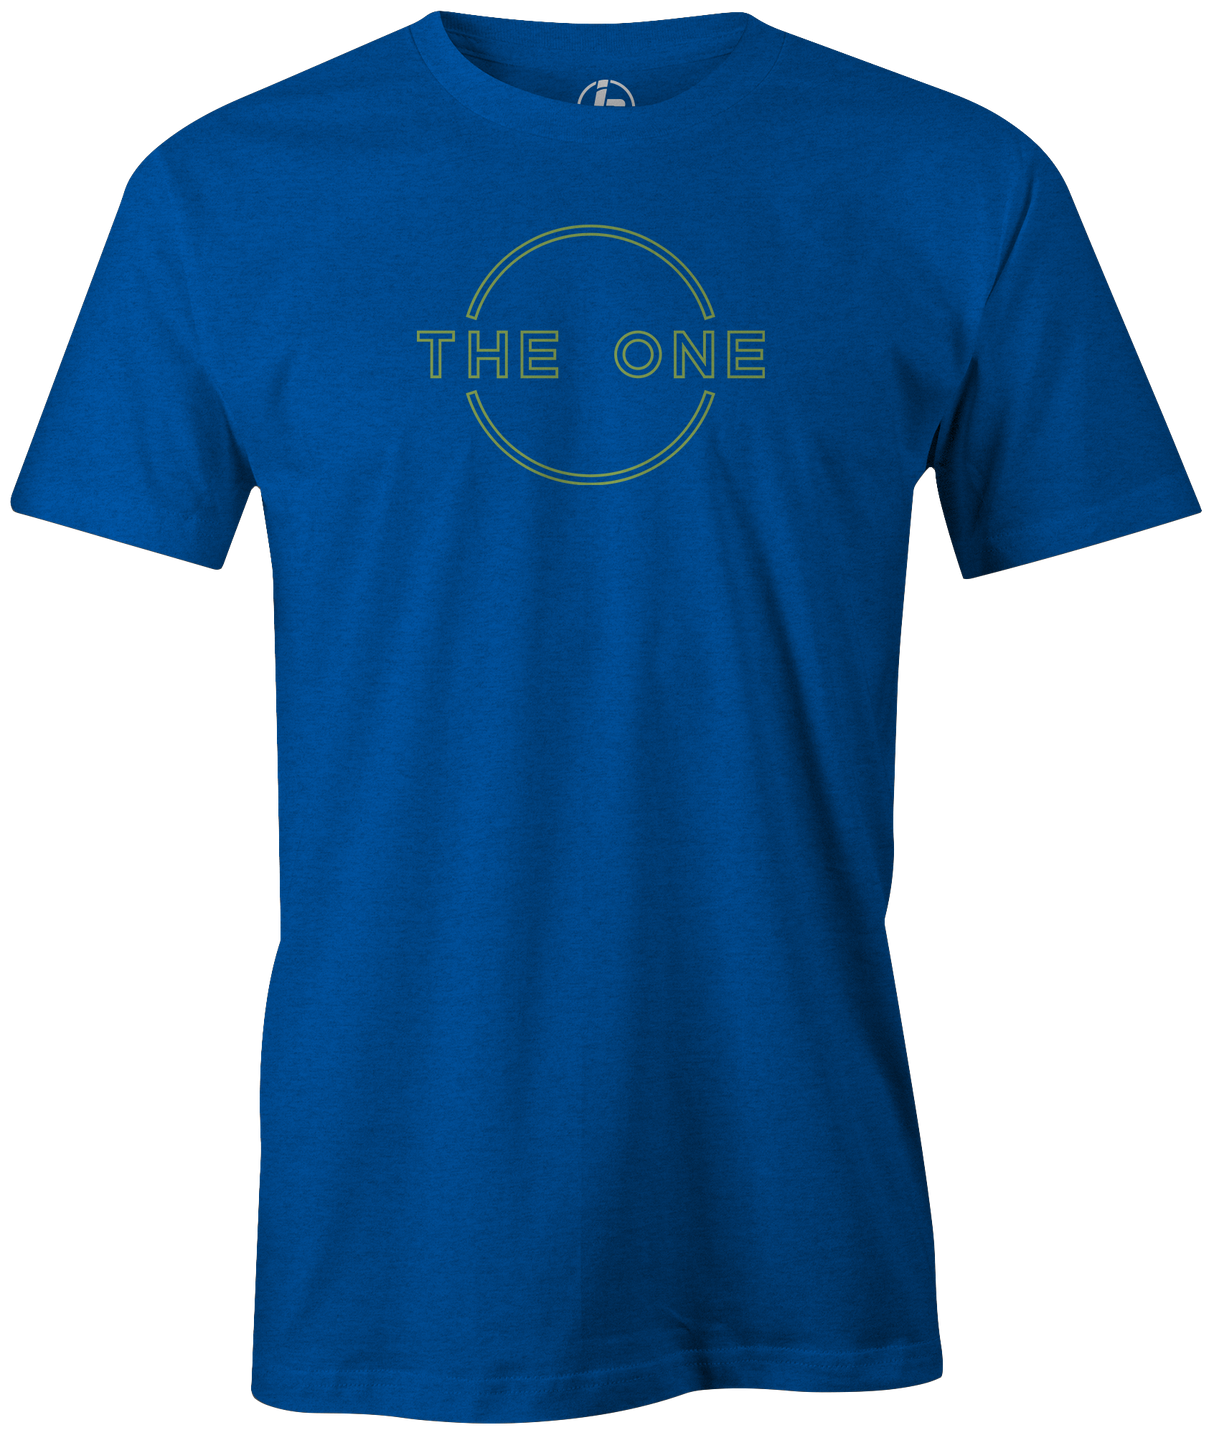 Hit the lanes with the new Ebonite Bowling The One Remix! Available in multiple colors.This is the perfect gift for any avid bowler! Tshirt, tee, tee-shirt, tee shirt, Pro shop. League bowling team shirt. PBA. PWBA. USBC. Junior Gold. Youth bowling. Tournament t-shirt. Men's. Bowling ball. bowling. classic. retro. vintage. throwback. 